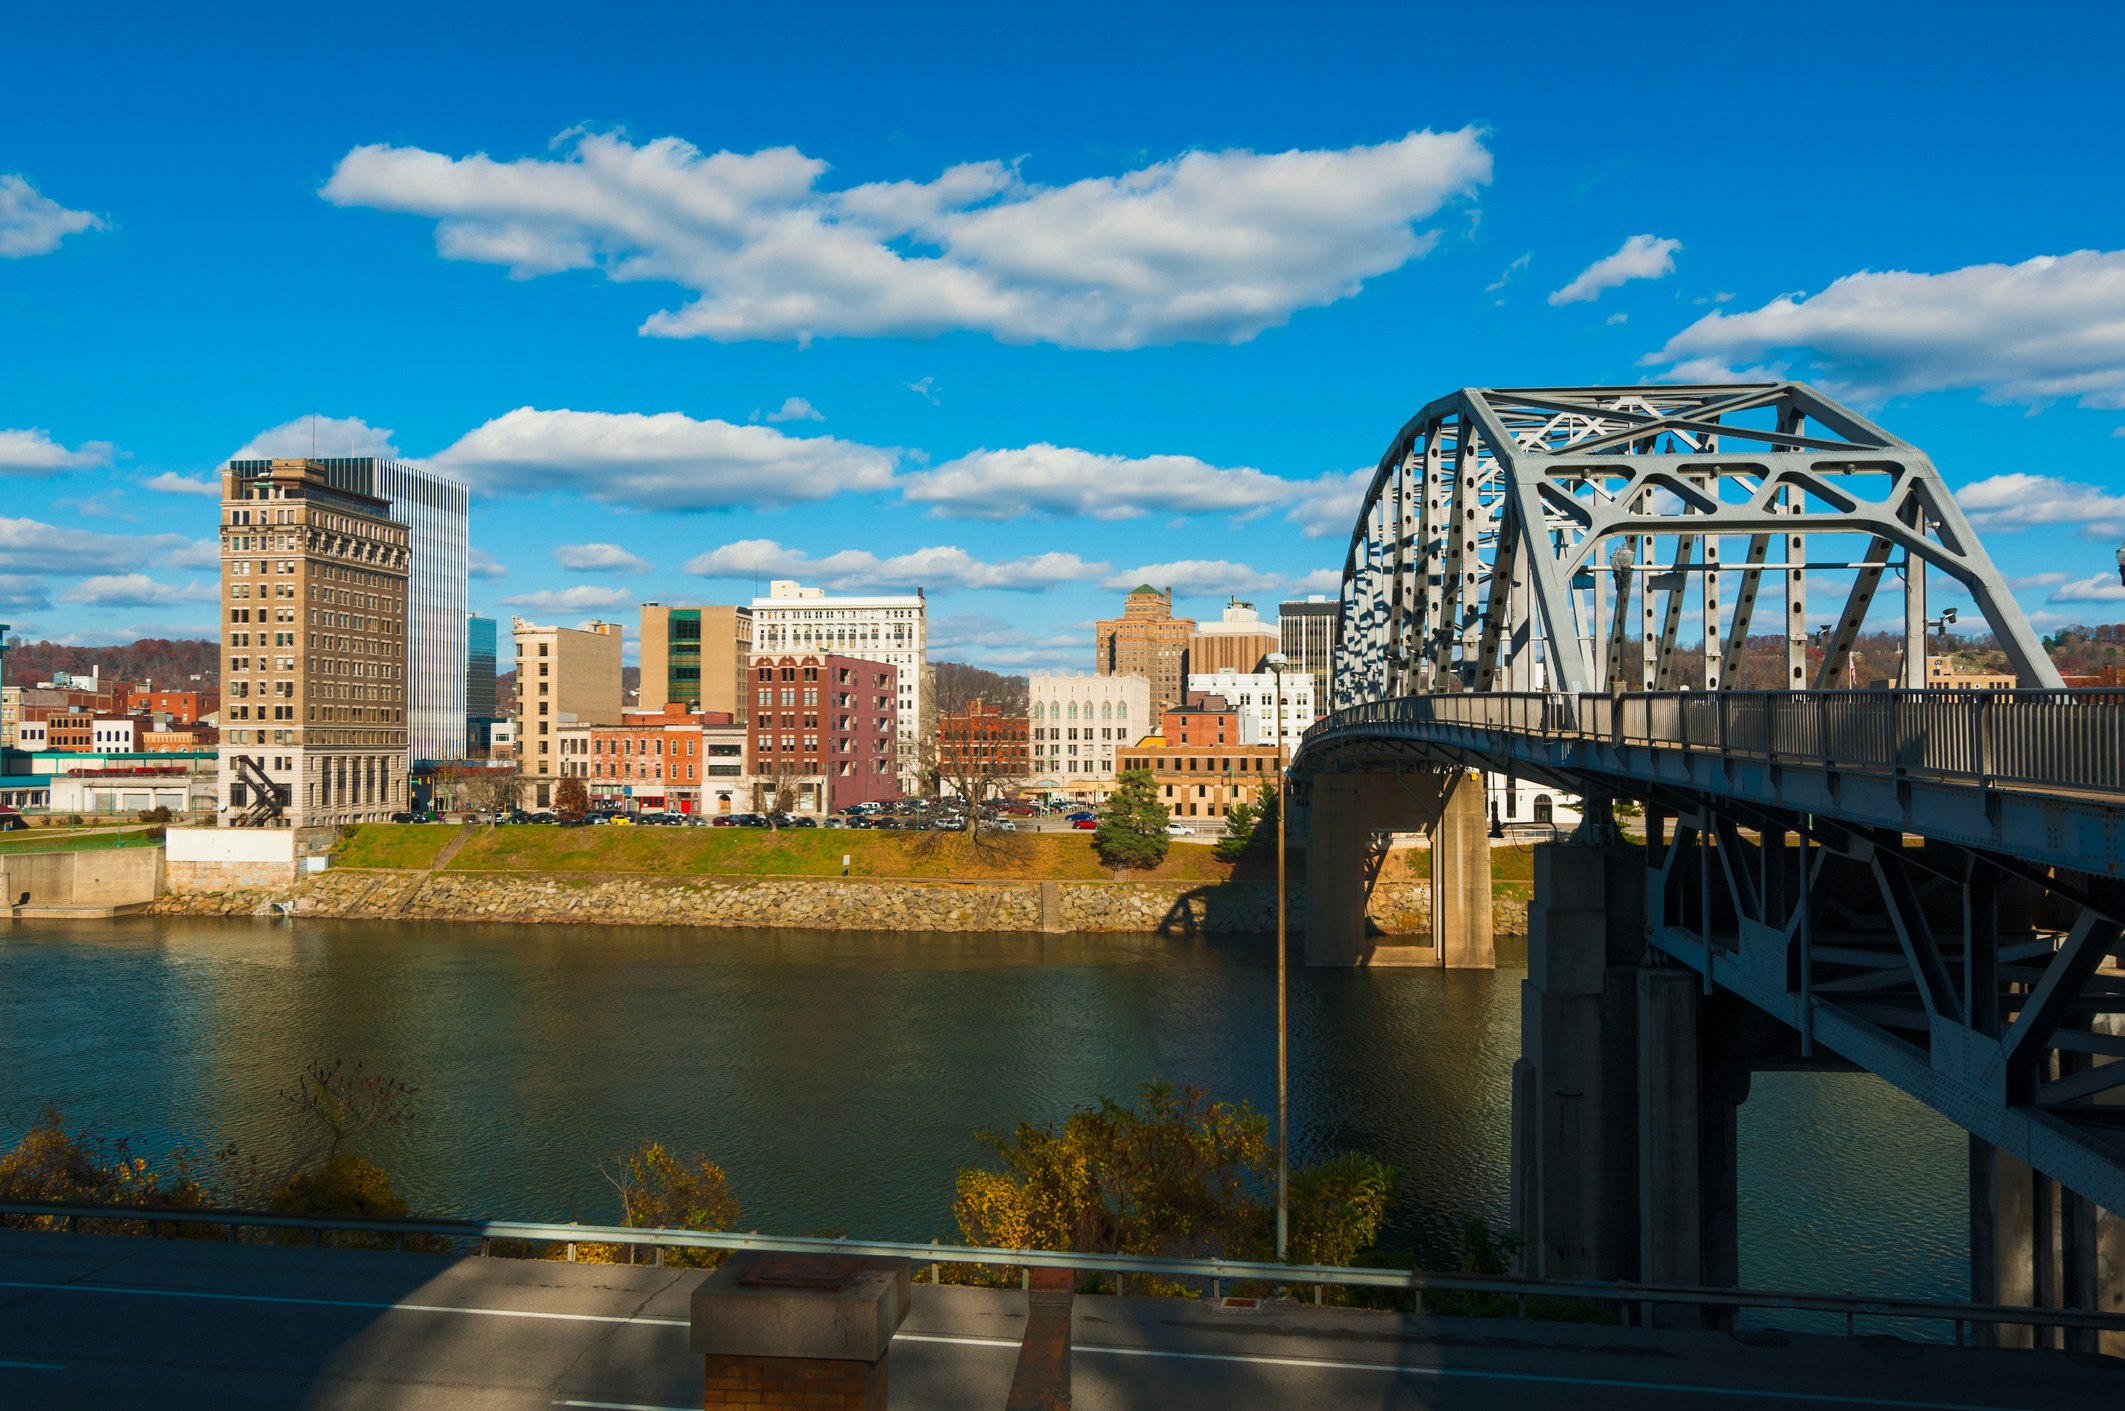 A view of the Charleston, West Virginia Skyline from across the Kanawha River. On the right side of the frame is the South Side Bridge, extending from the Amtrak station to the city center. The skyline is mostly made up of low, multi-story brick and masonry early skyscrapers in beige or neutral tones. The river is a deep greyish blue. The sky is bright and full of fluffy white clouds. 